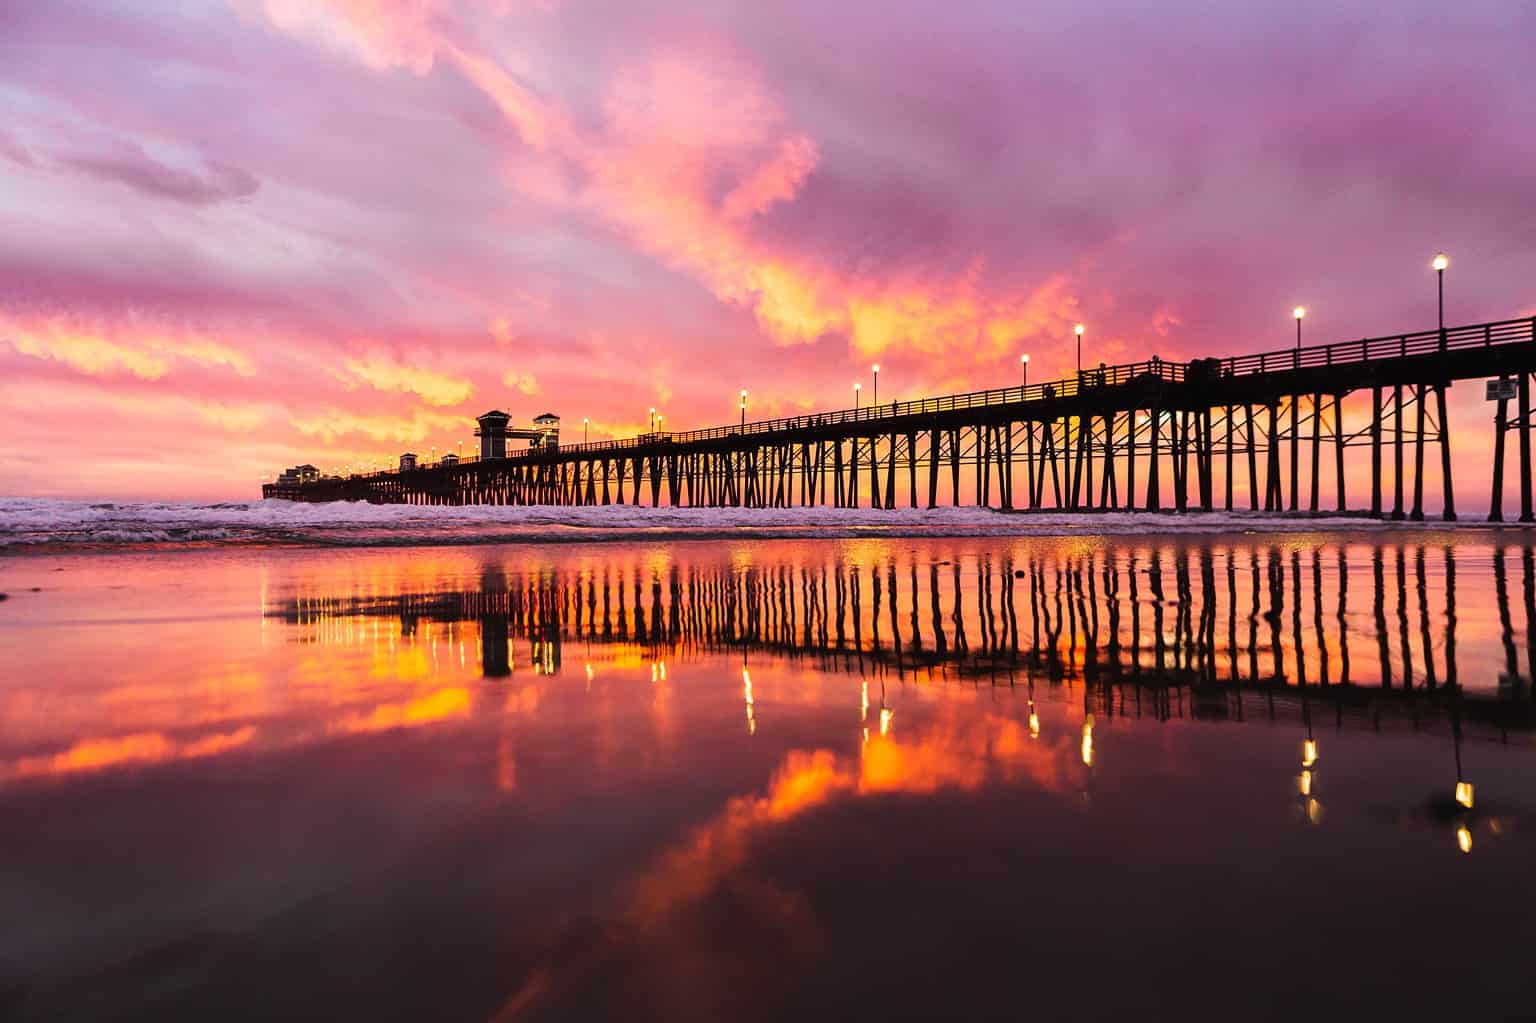 Oceanside vs Carlsbad: Which City Is Best For Your Vacation?